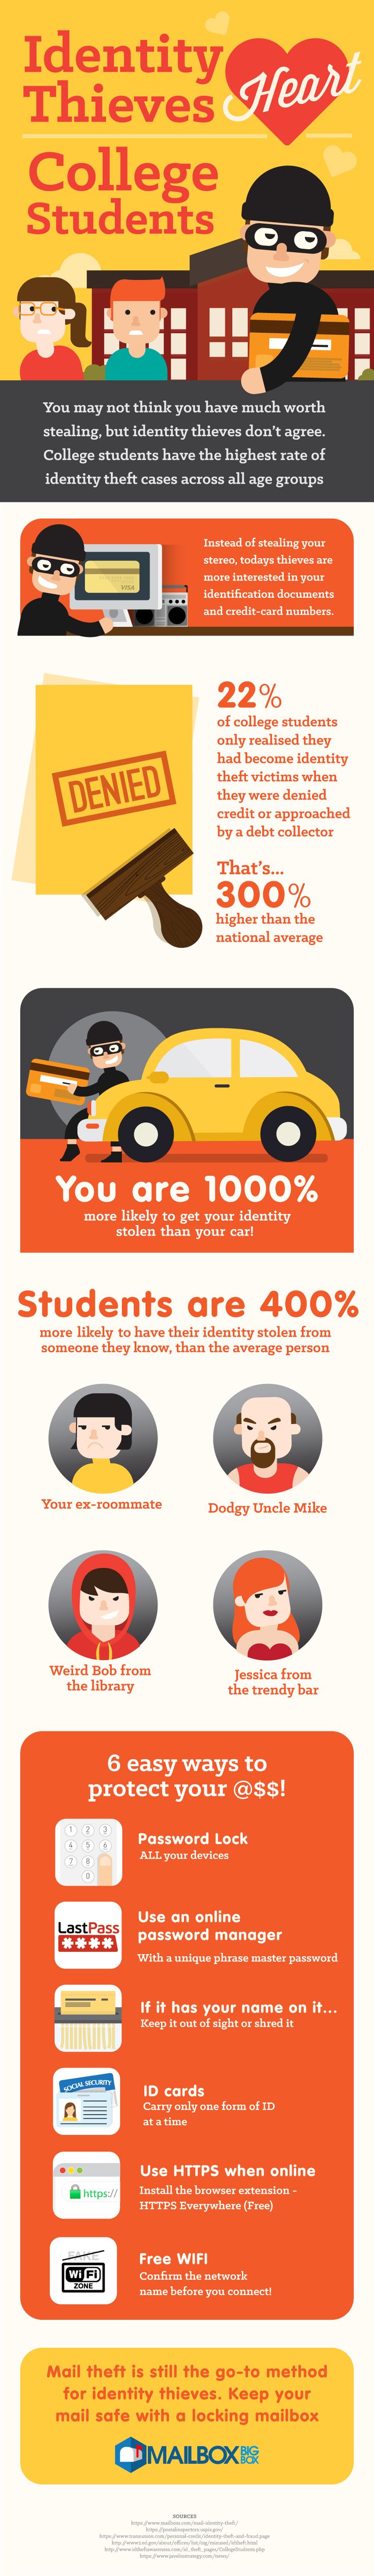 Educational infographic : Identity Thieves Heart College Students ...